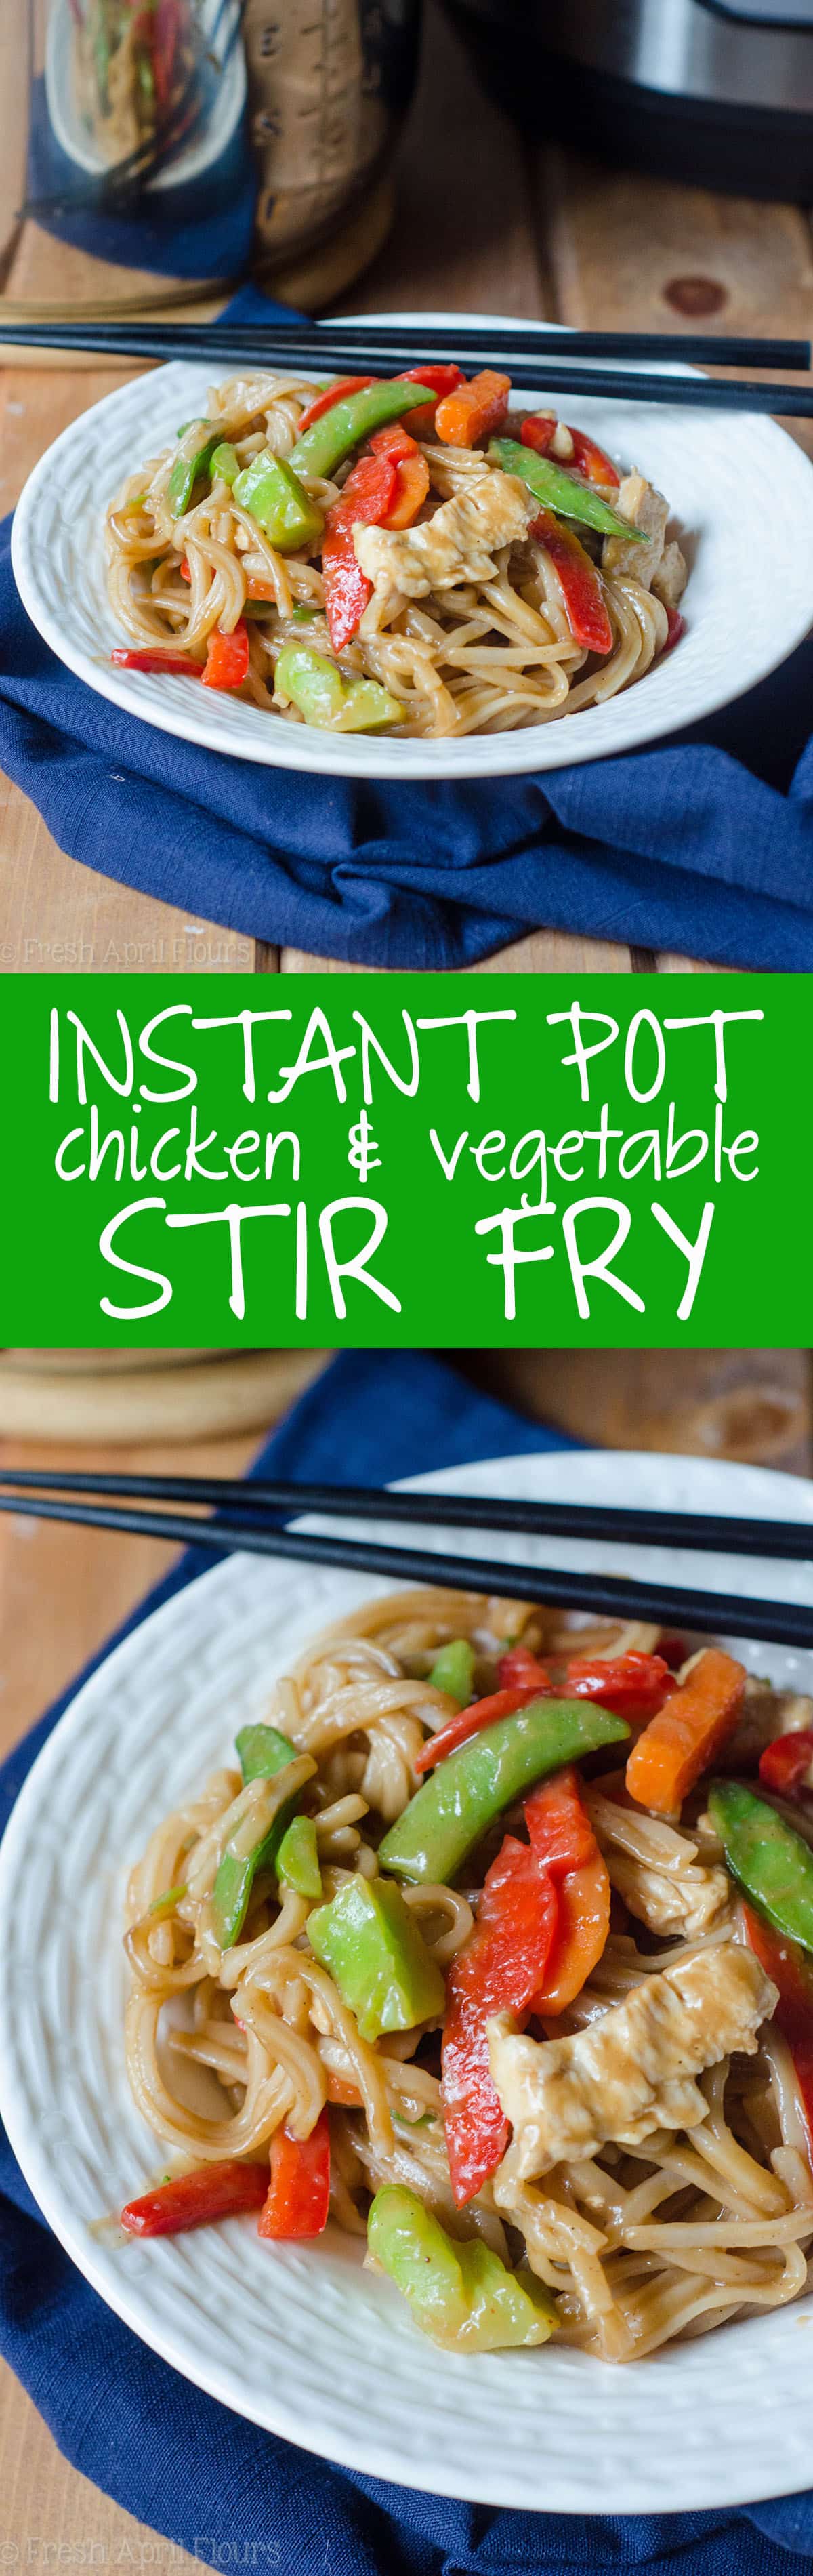 Instant Pot Chicken & Vegetable Stir Fry: A quick and easy version of "stir fry," no pan or stovetop required! Sticky and dense noodles, tender chicken, and crunchy vegetables, ready in about 20 minutes! via @frshaprilflours